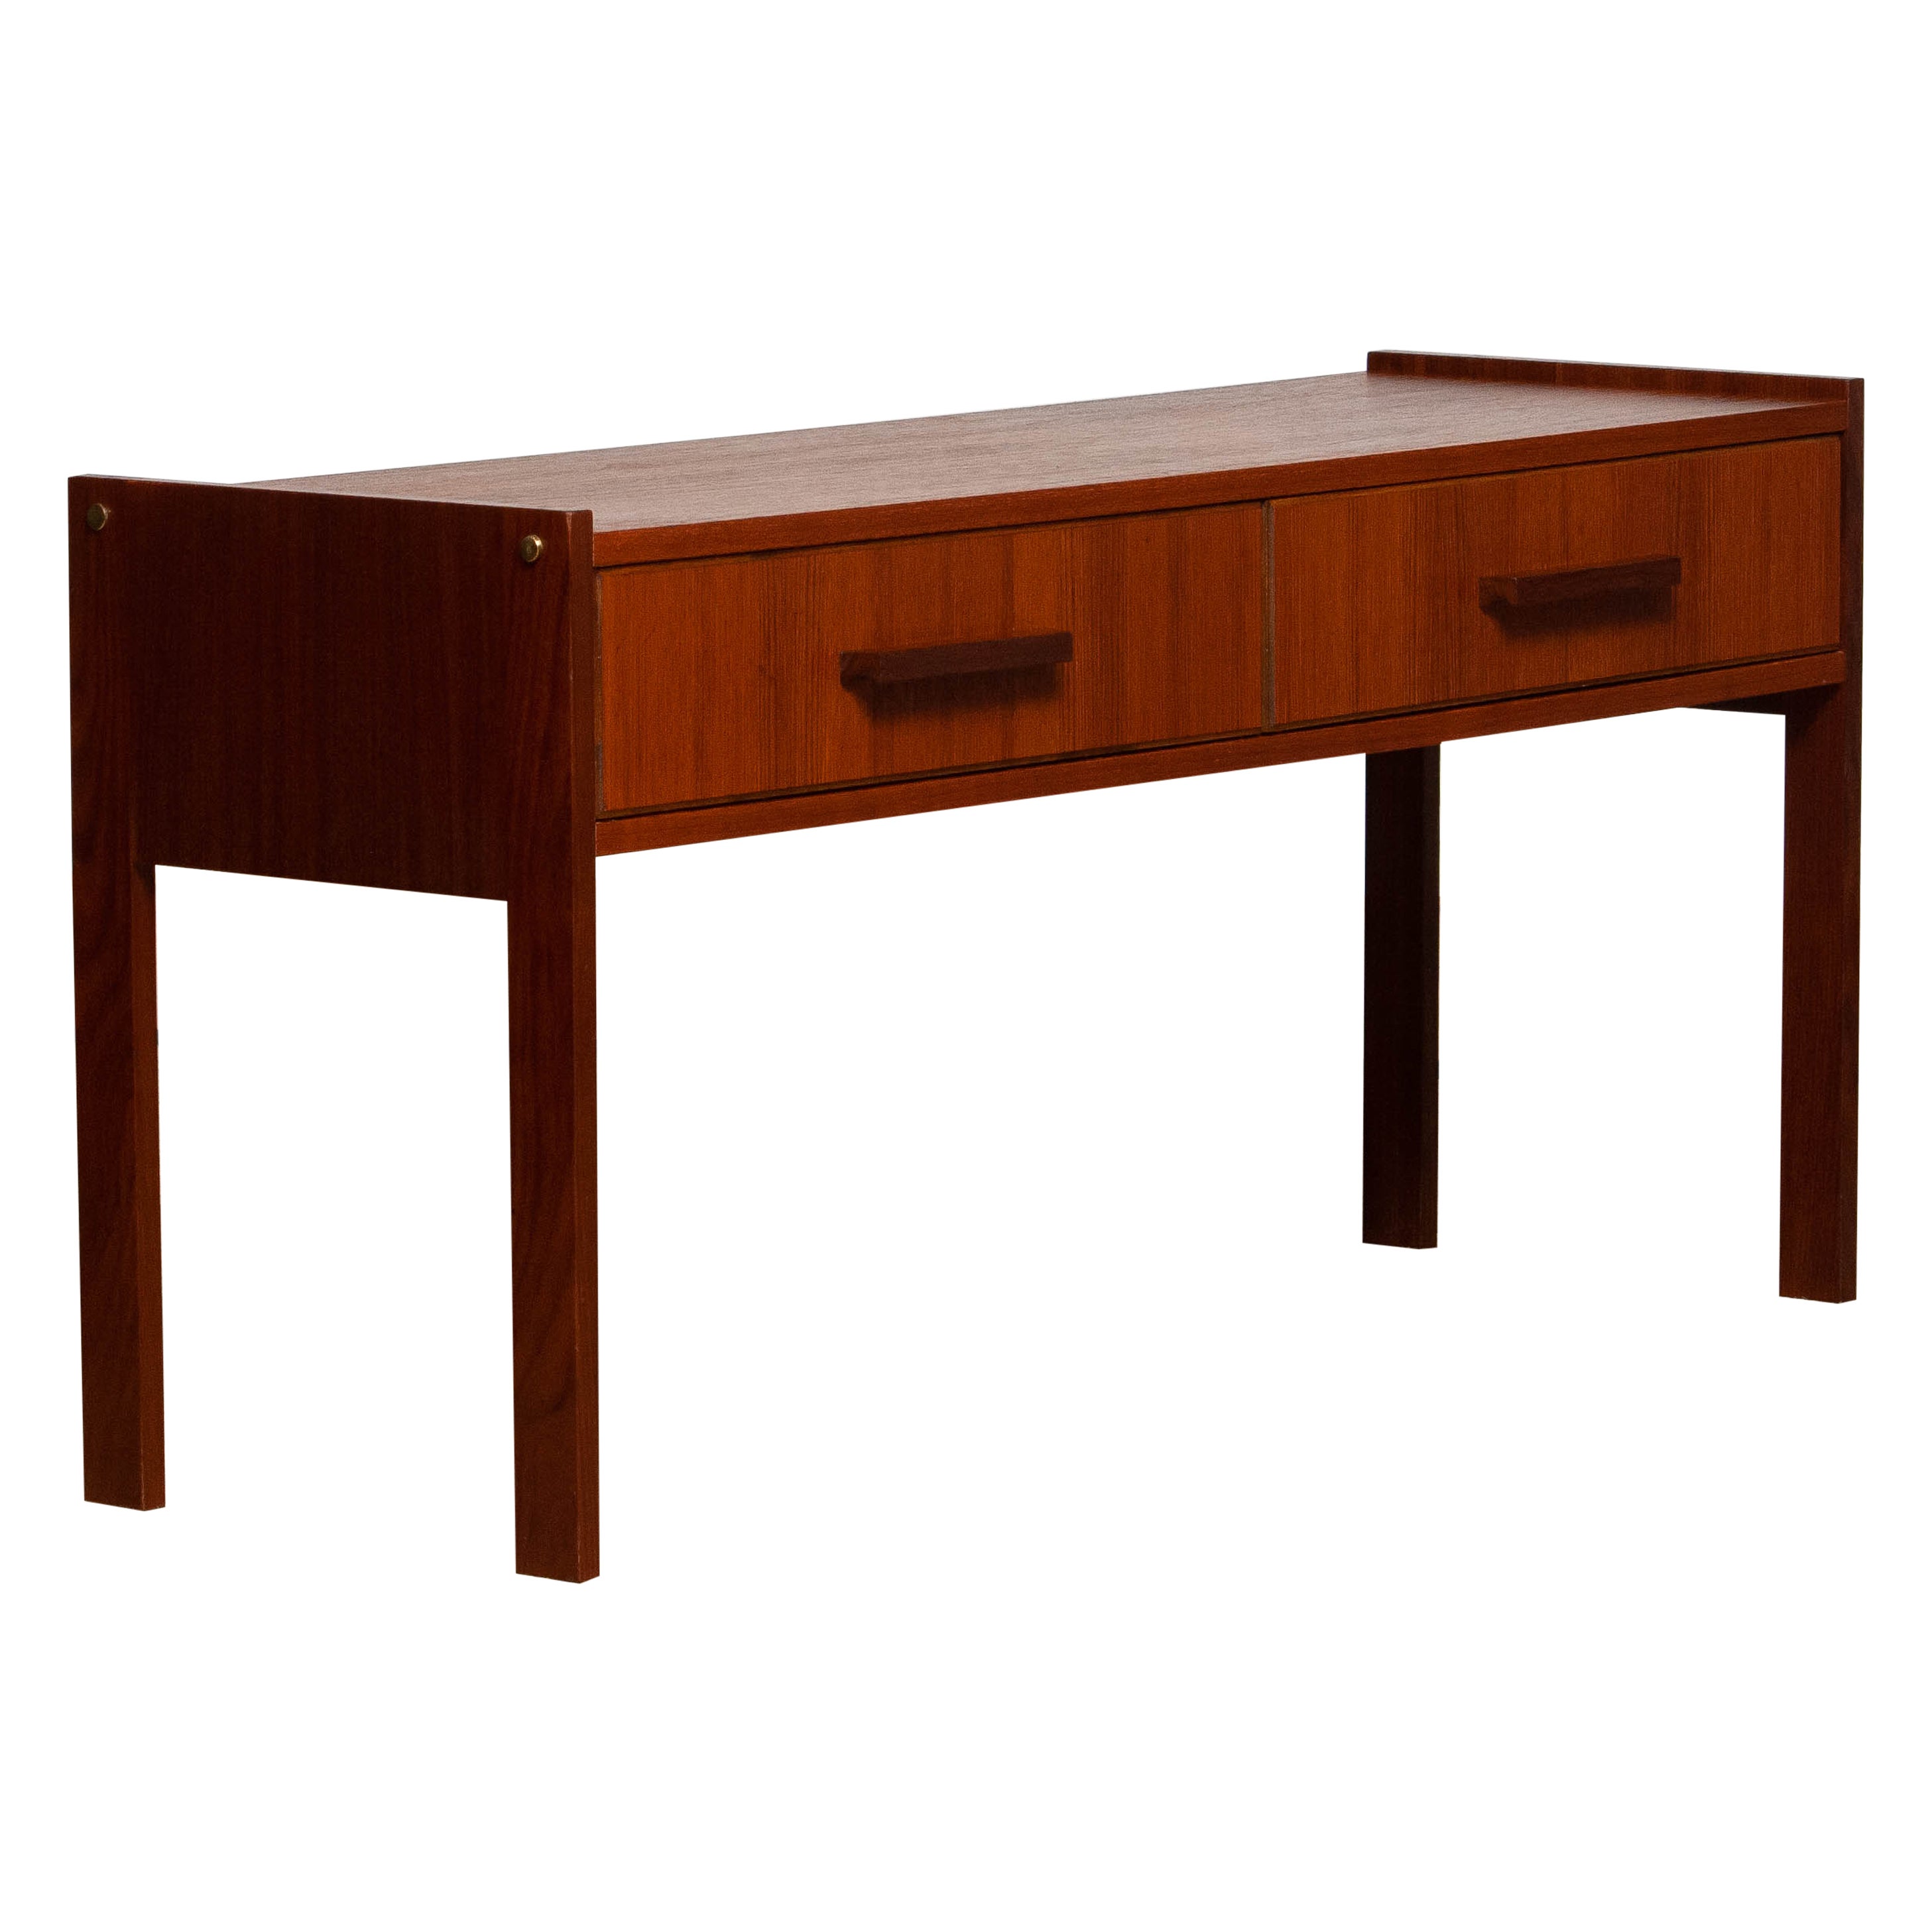 1960's Teak Two Drawer Hall Cabinet / Side Table from Denmark